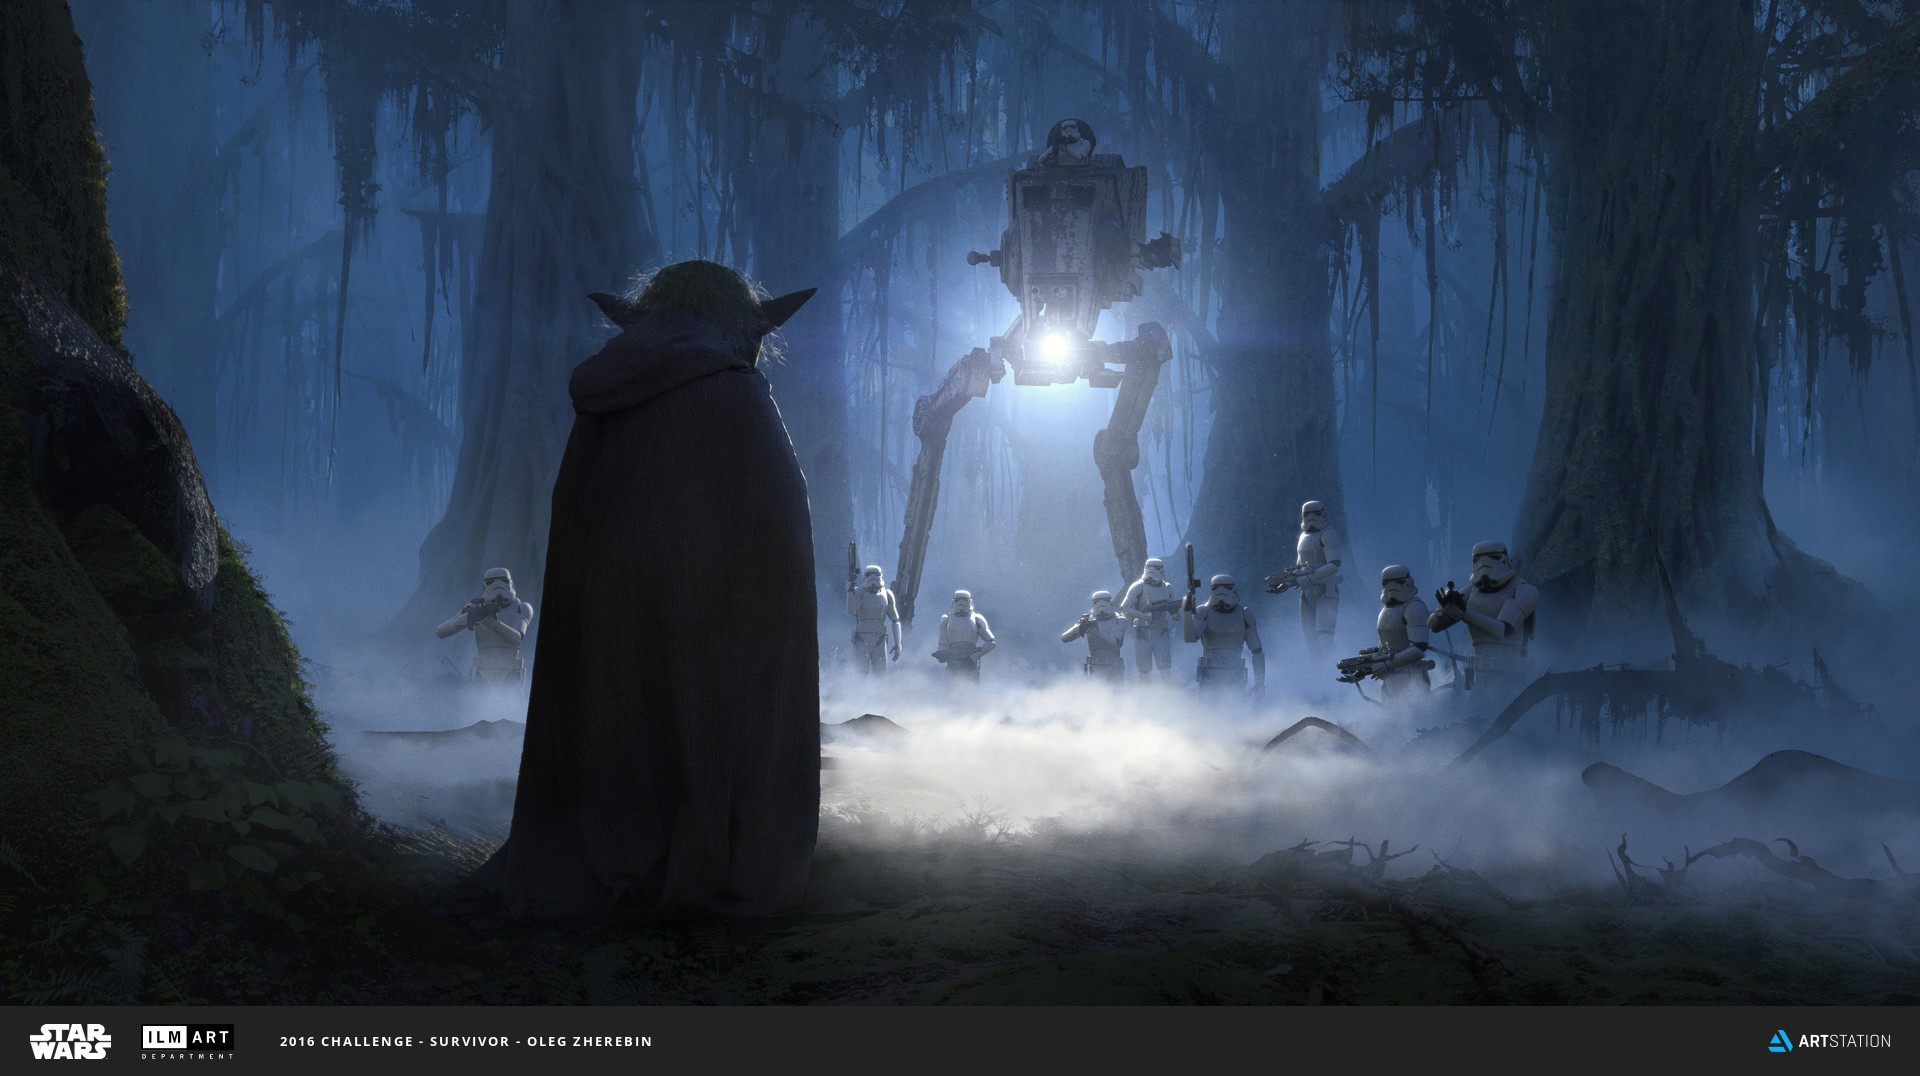 Artwork Star Wars Yoda Storm Troopers AT ST Science Fiction AT ST Walker Stormtrooper 1920x1076